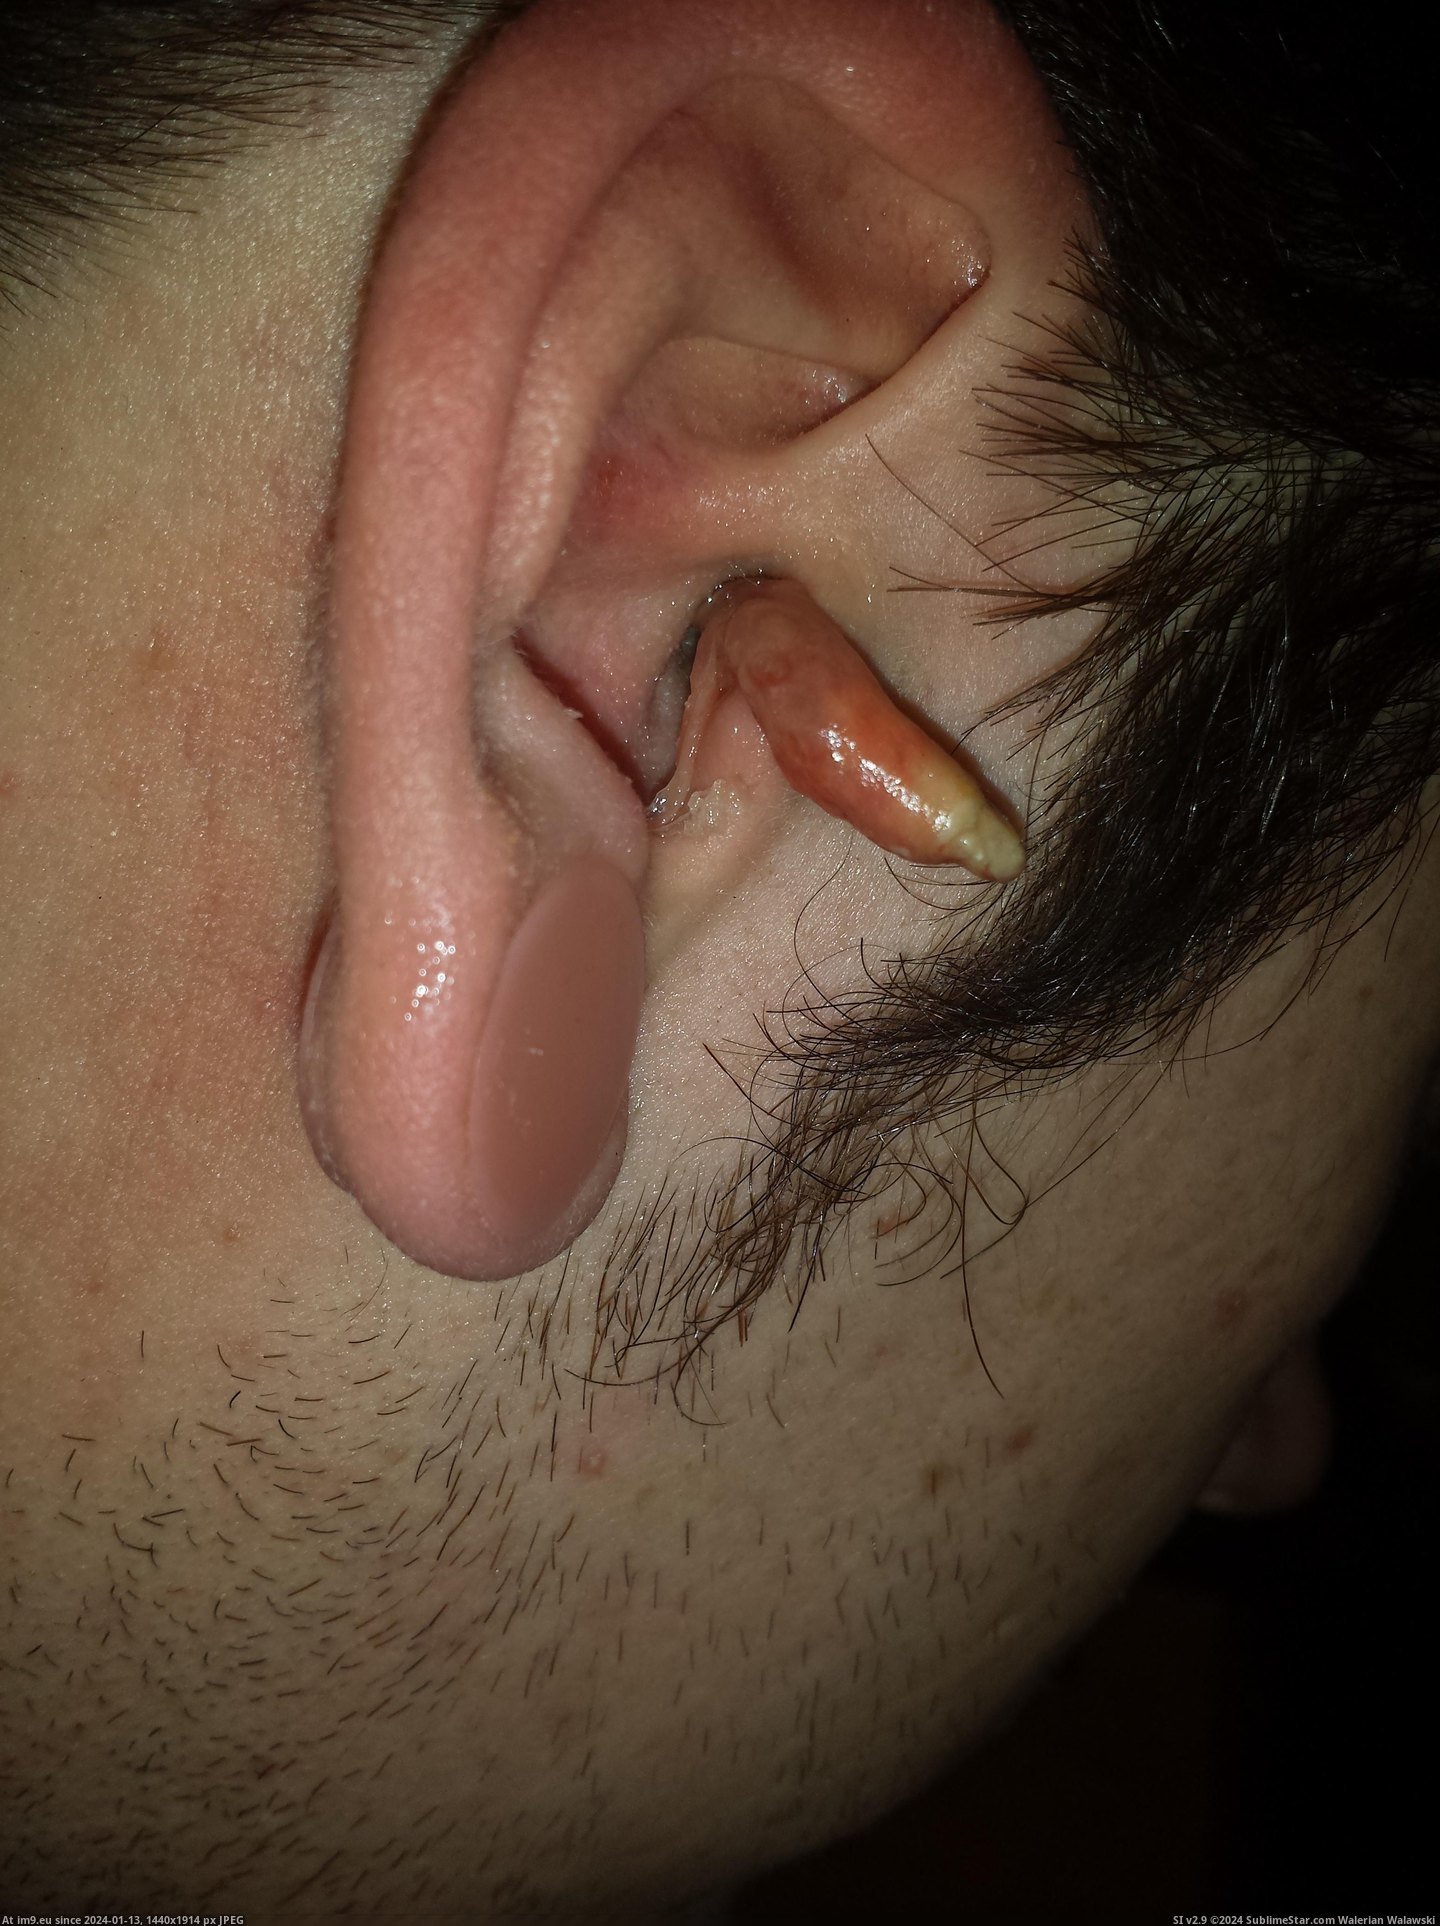 #Wtf #Ear #Infection #Crazy [Wtf] My crazy ear infection 3 Pic. (Image of album My r/WTF favs))